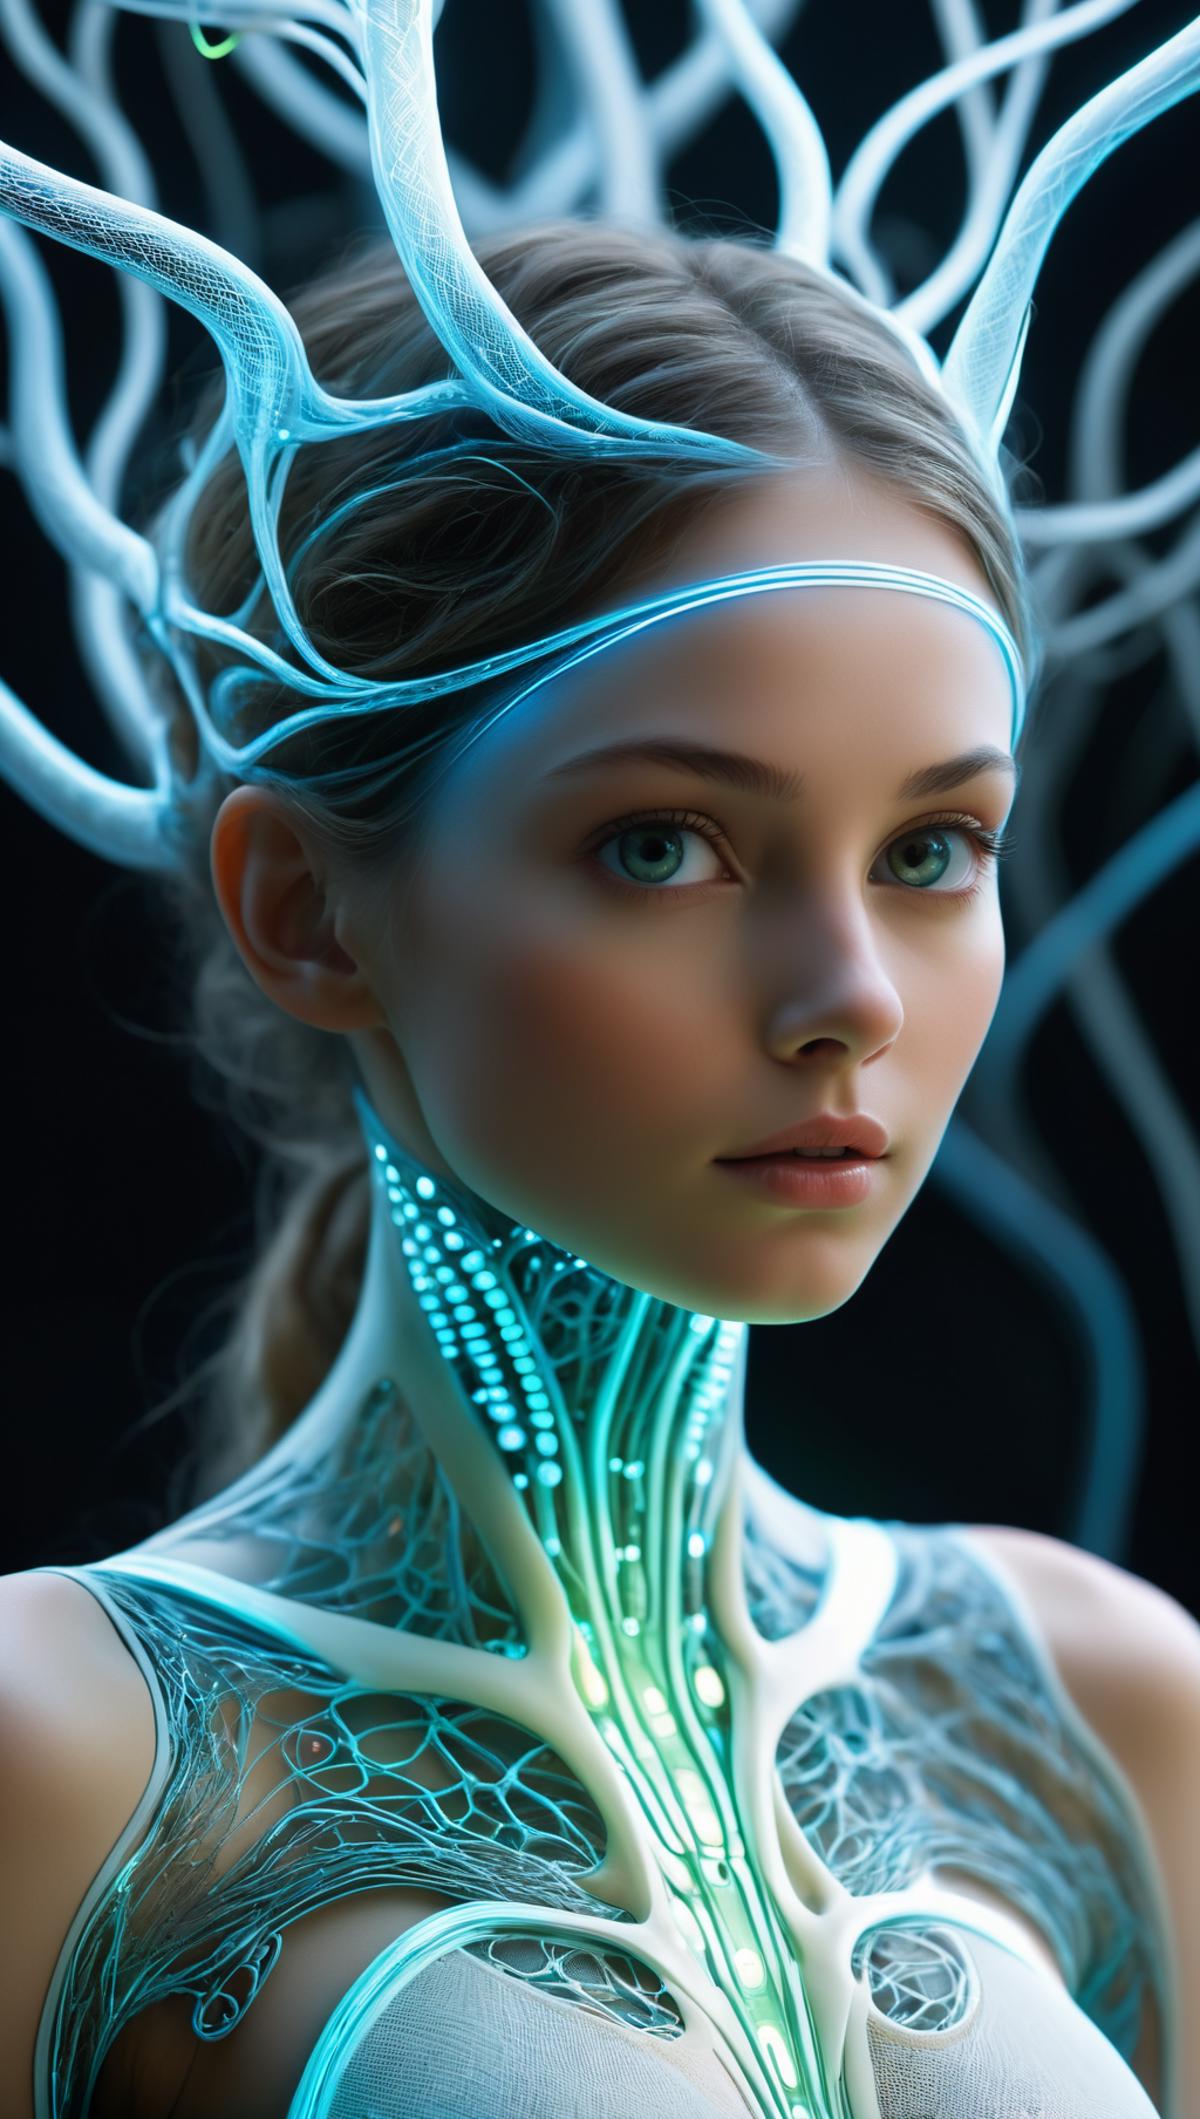 Illustration of a woman with a futuristic outfit and a blue light necklace.